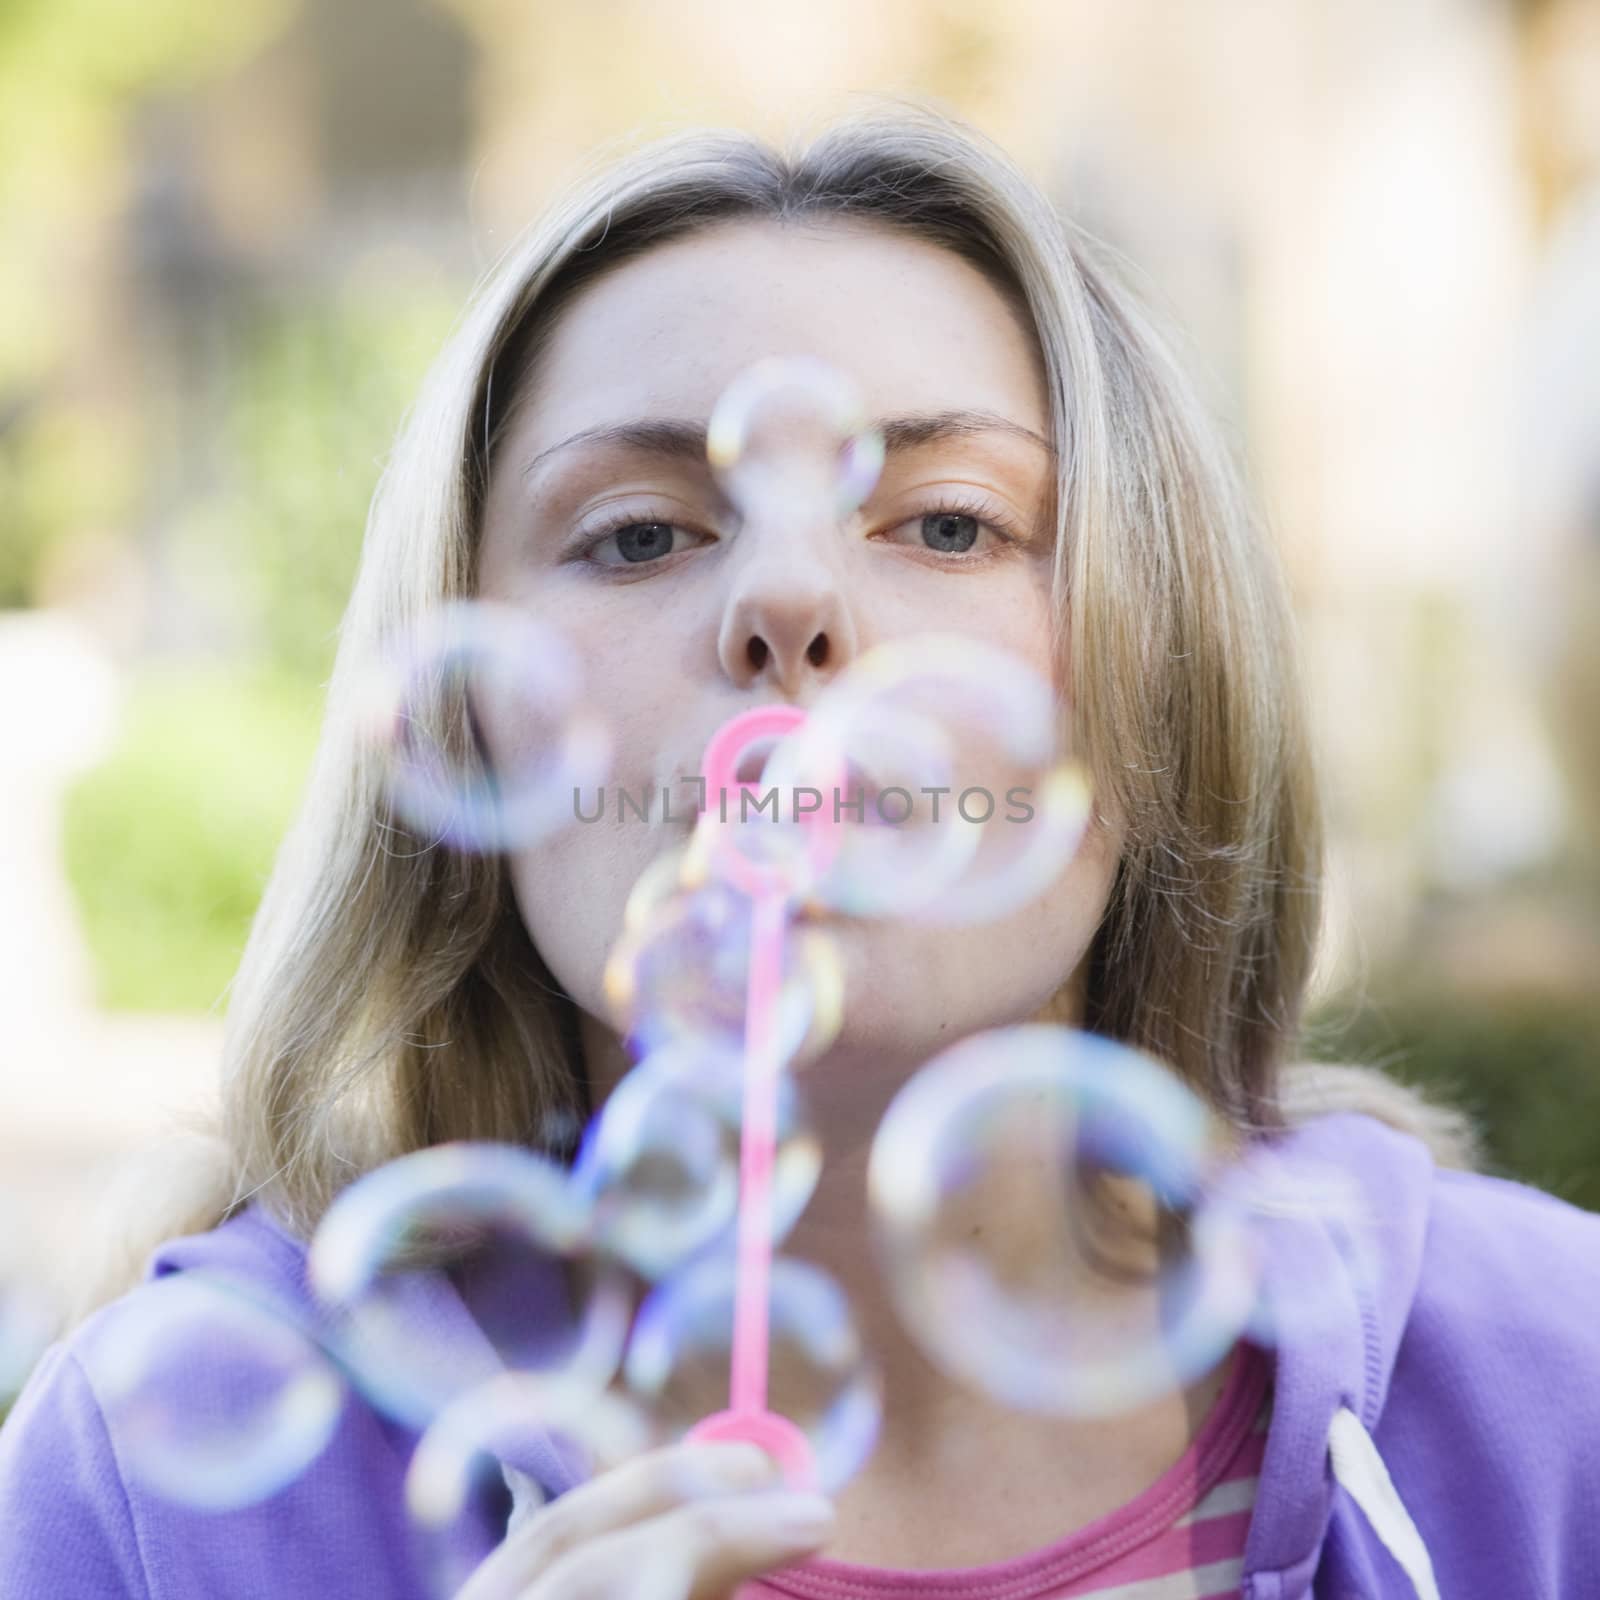 Teen Girl Blowing Bubbles by ptimages